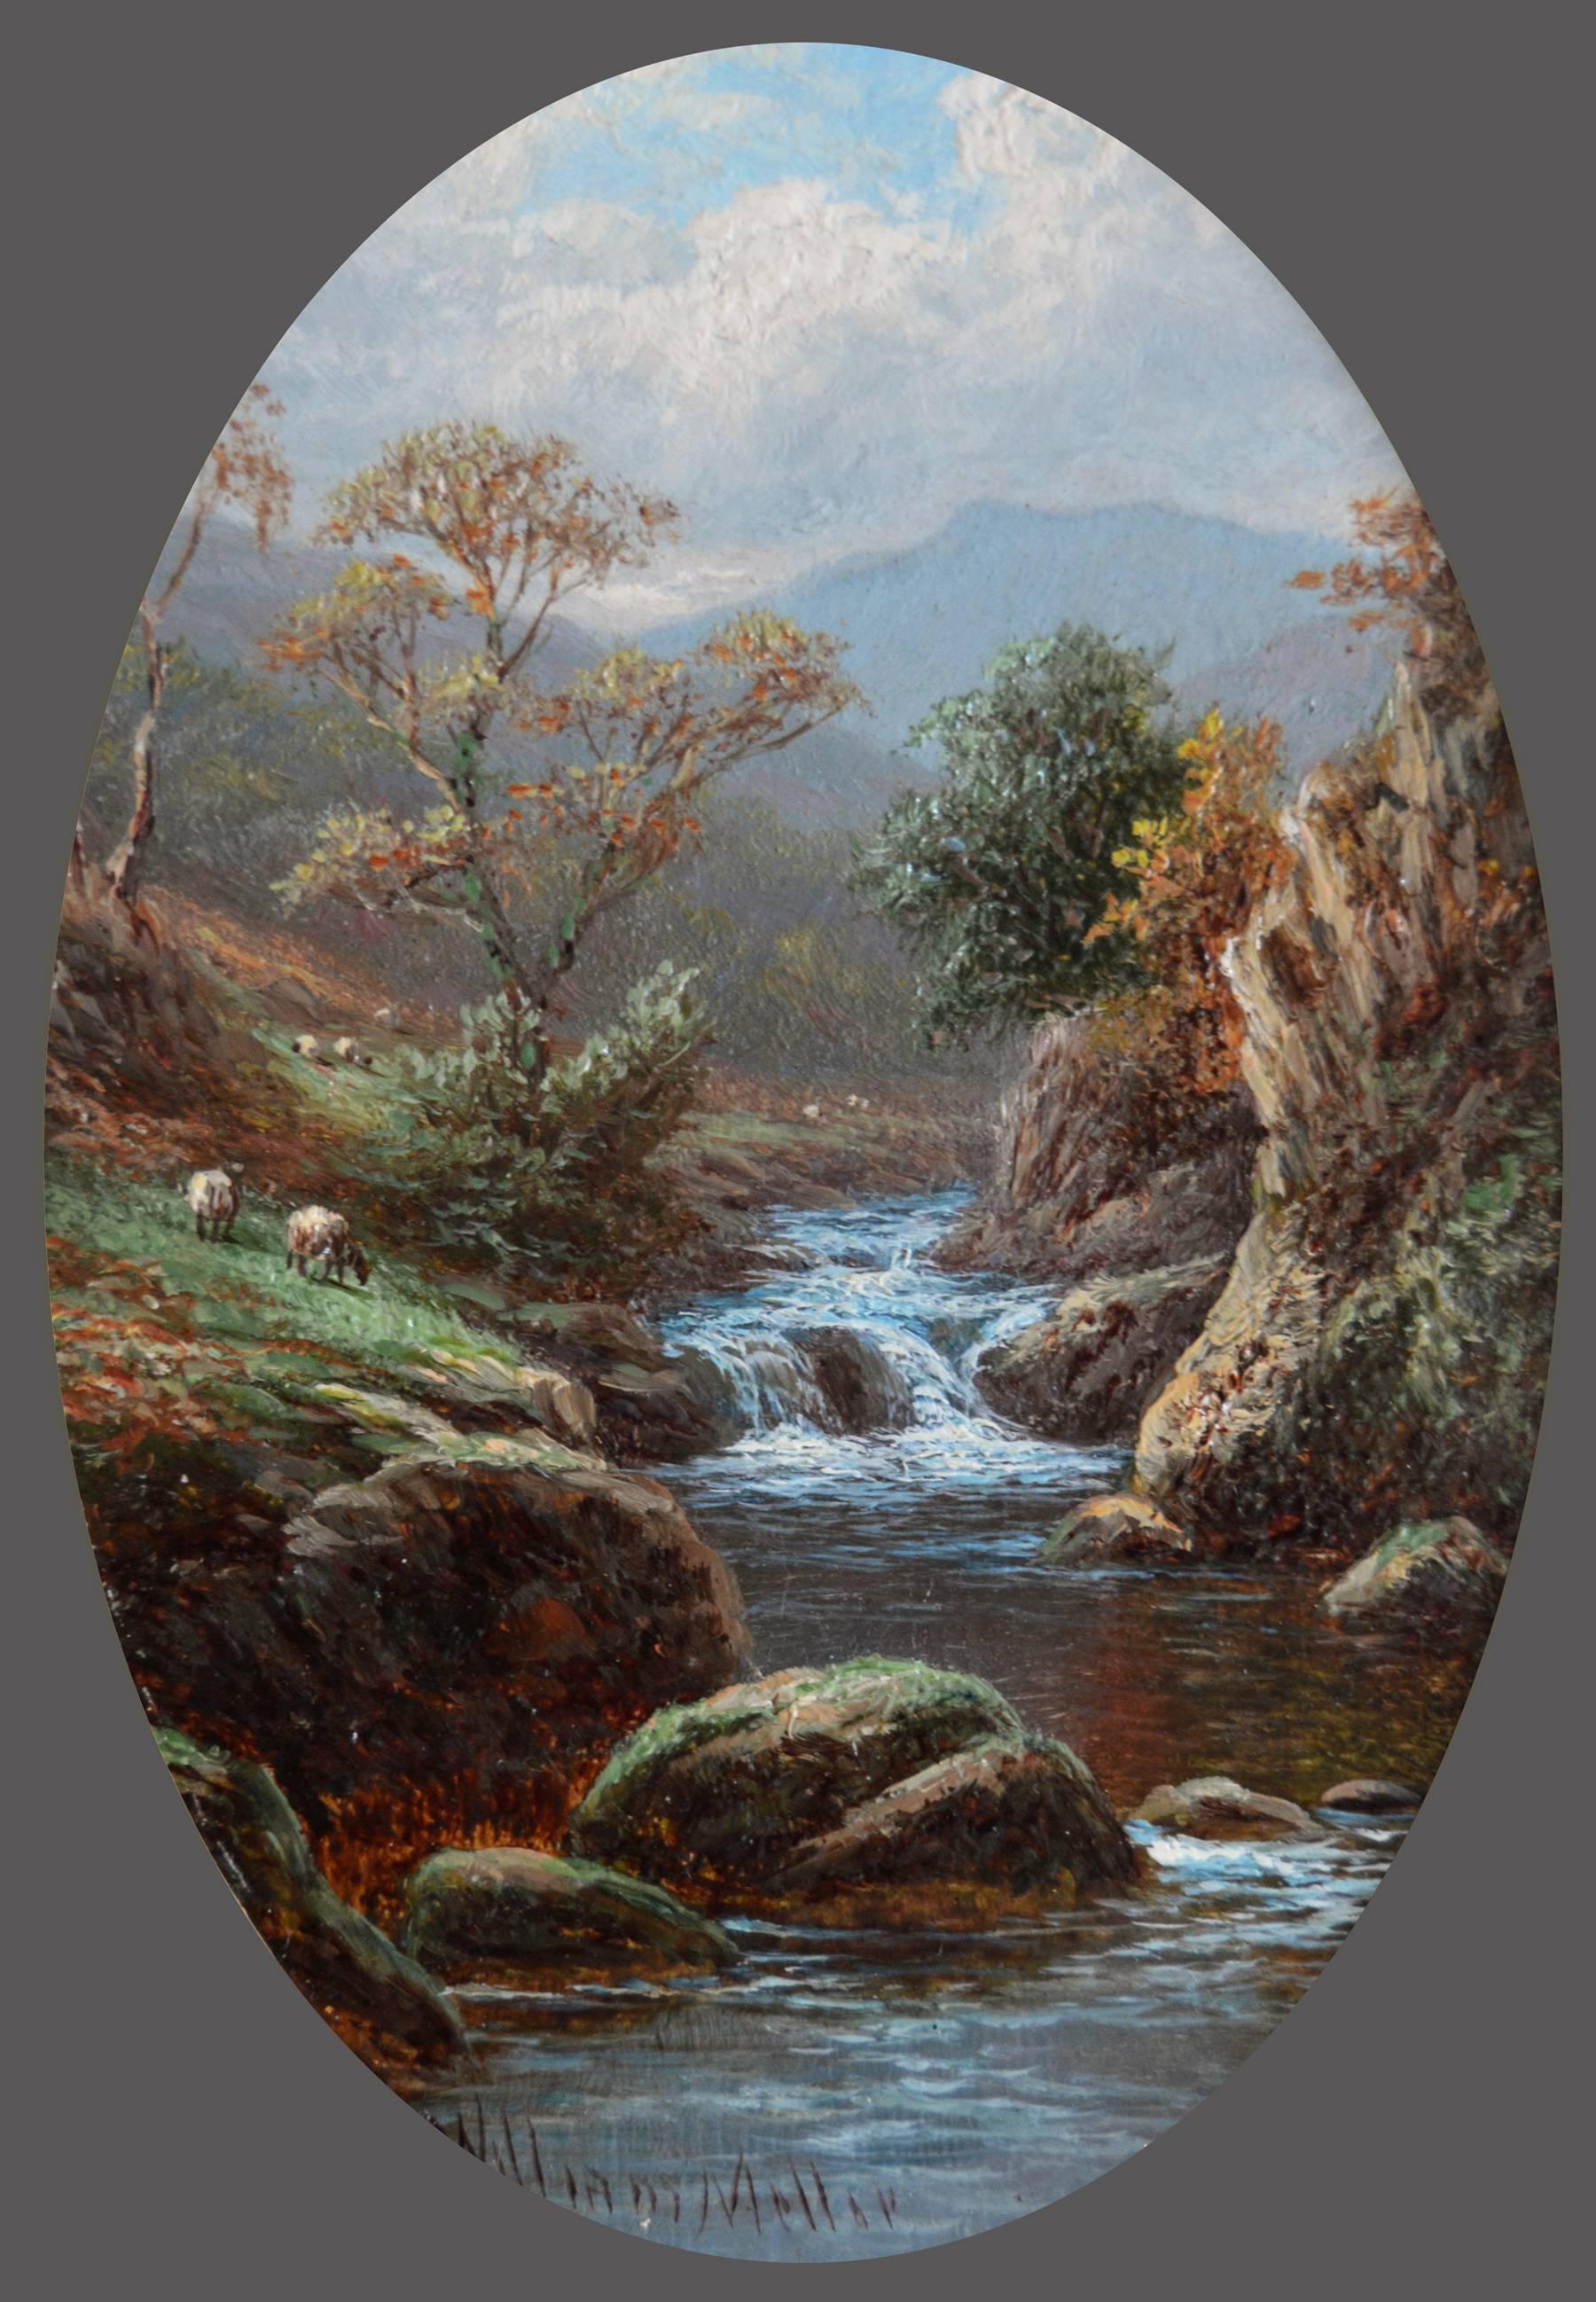 William Mellor
British, (1851-1931)
On the Greta, near Barnard Castle;
On the Lledr North Wales
Oil on board, pair signed
Image size: 6 inches x 4 inches (oval)
Size including frame: 11½ inches x 9½ inches (oval)
Mellor was a landscape painter born